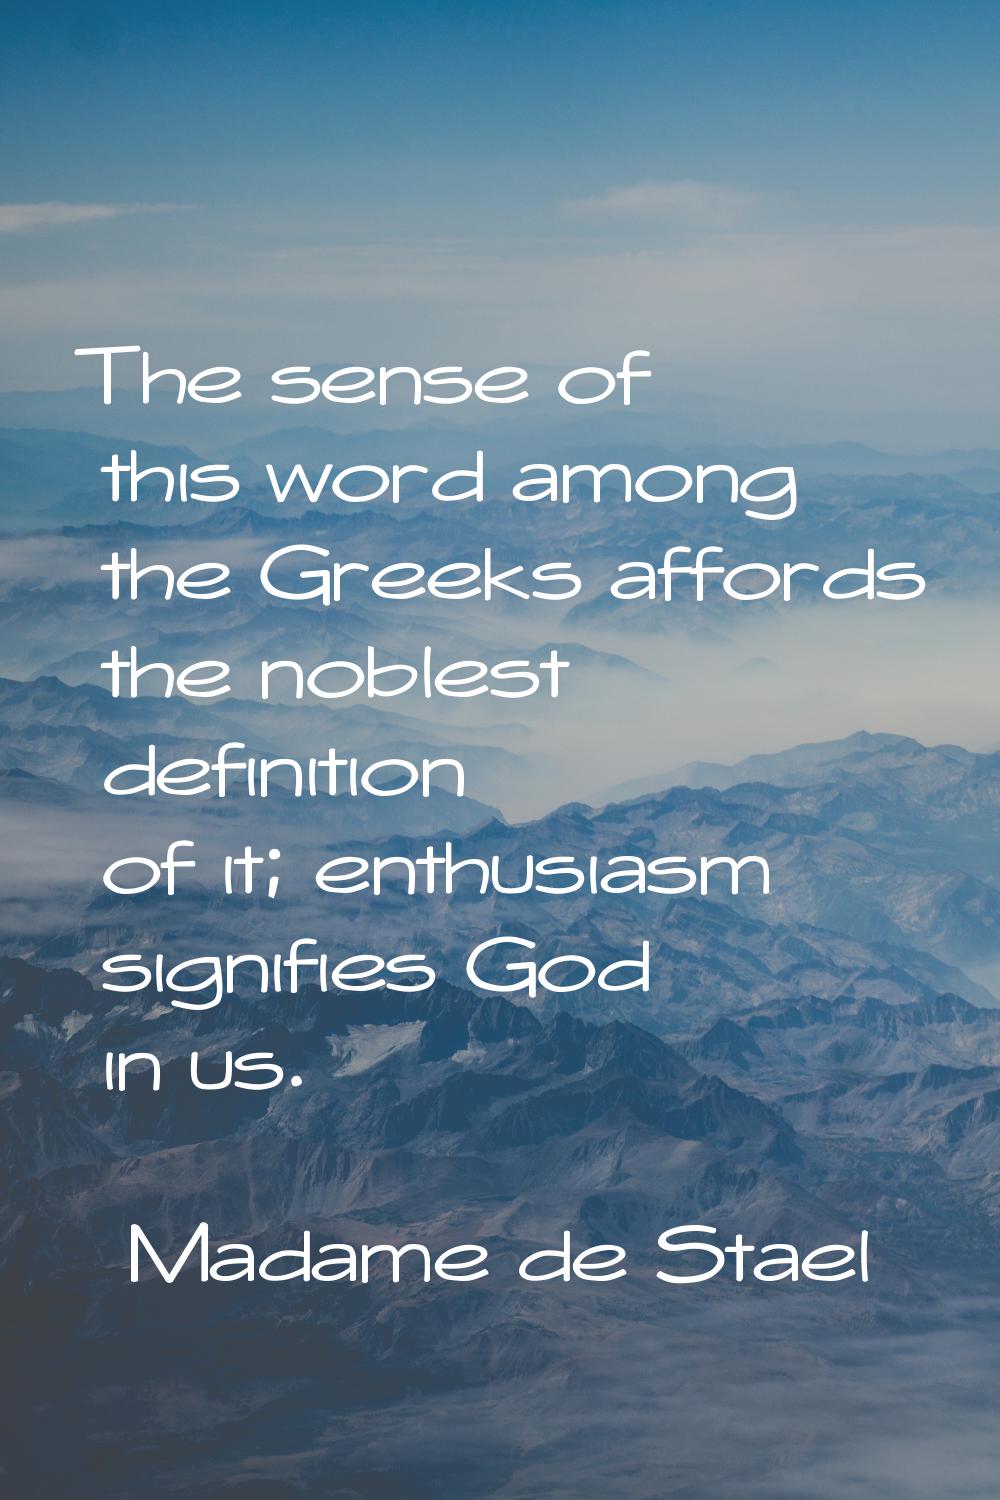 The sense of this word among the Greeks affords the noblest definition of it; enthusiasm signifies 